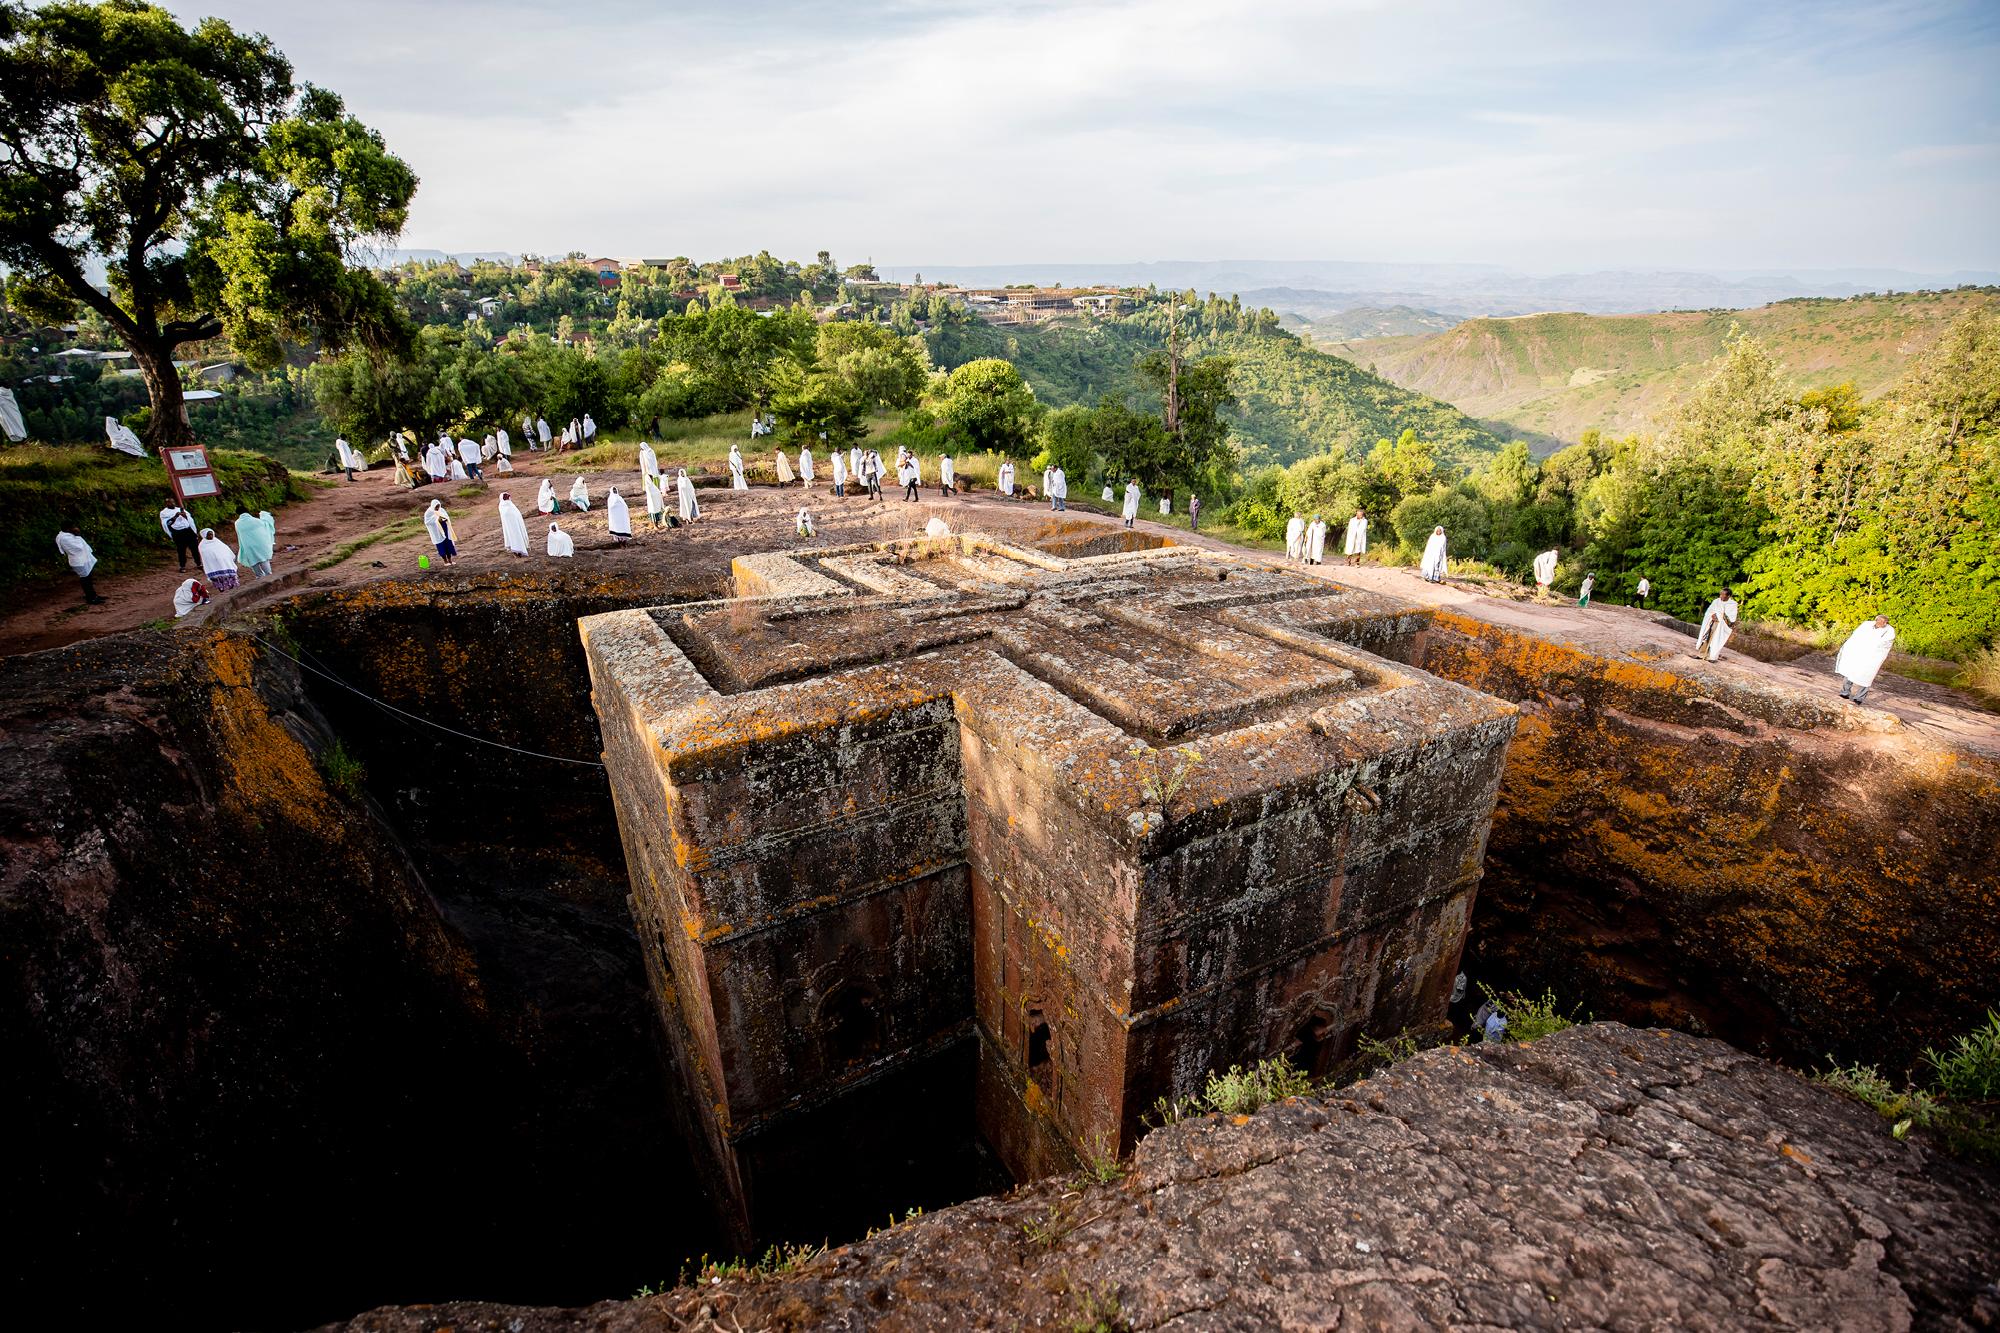 Lalibela is famed for its rock-hewn churches.